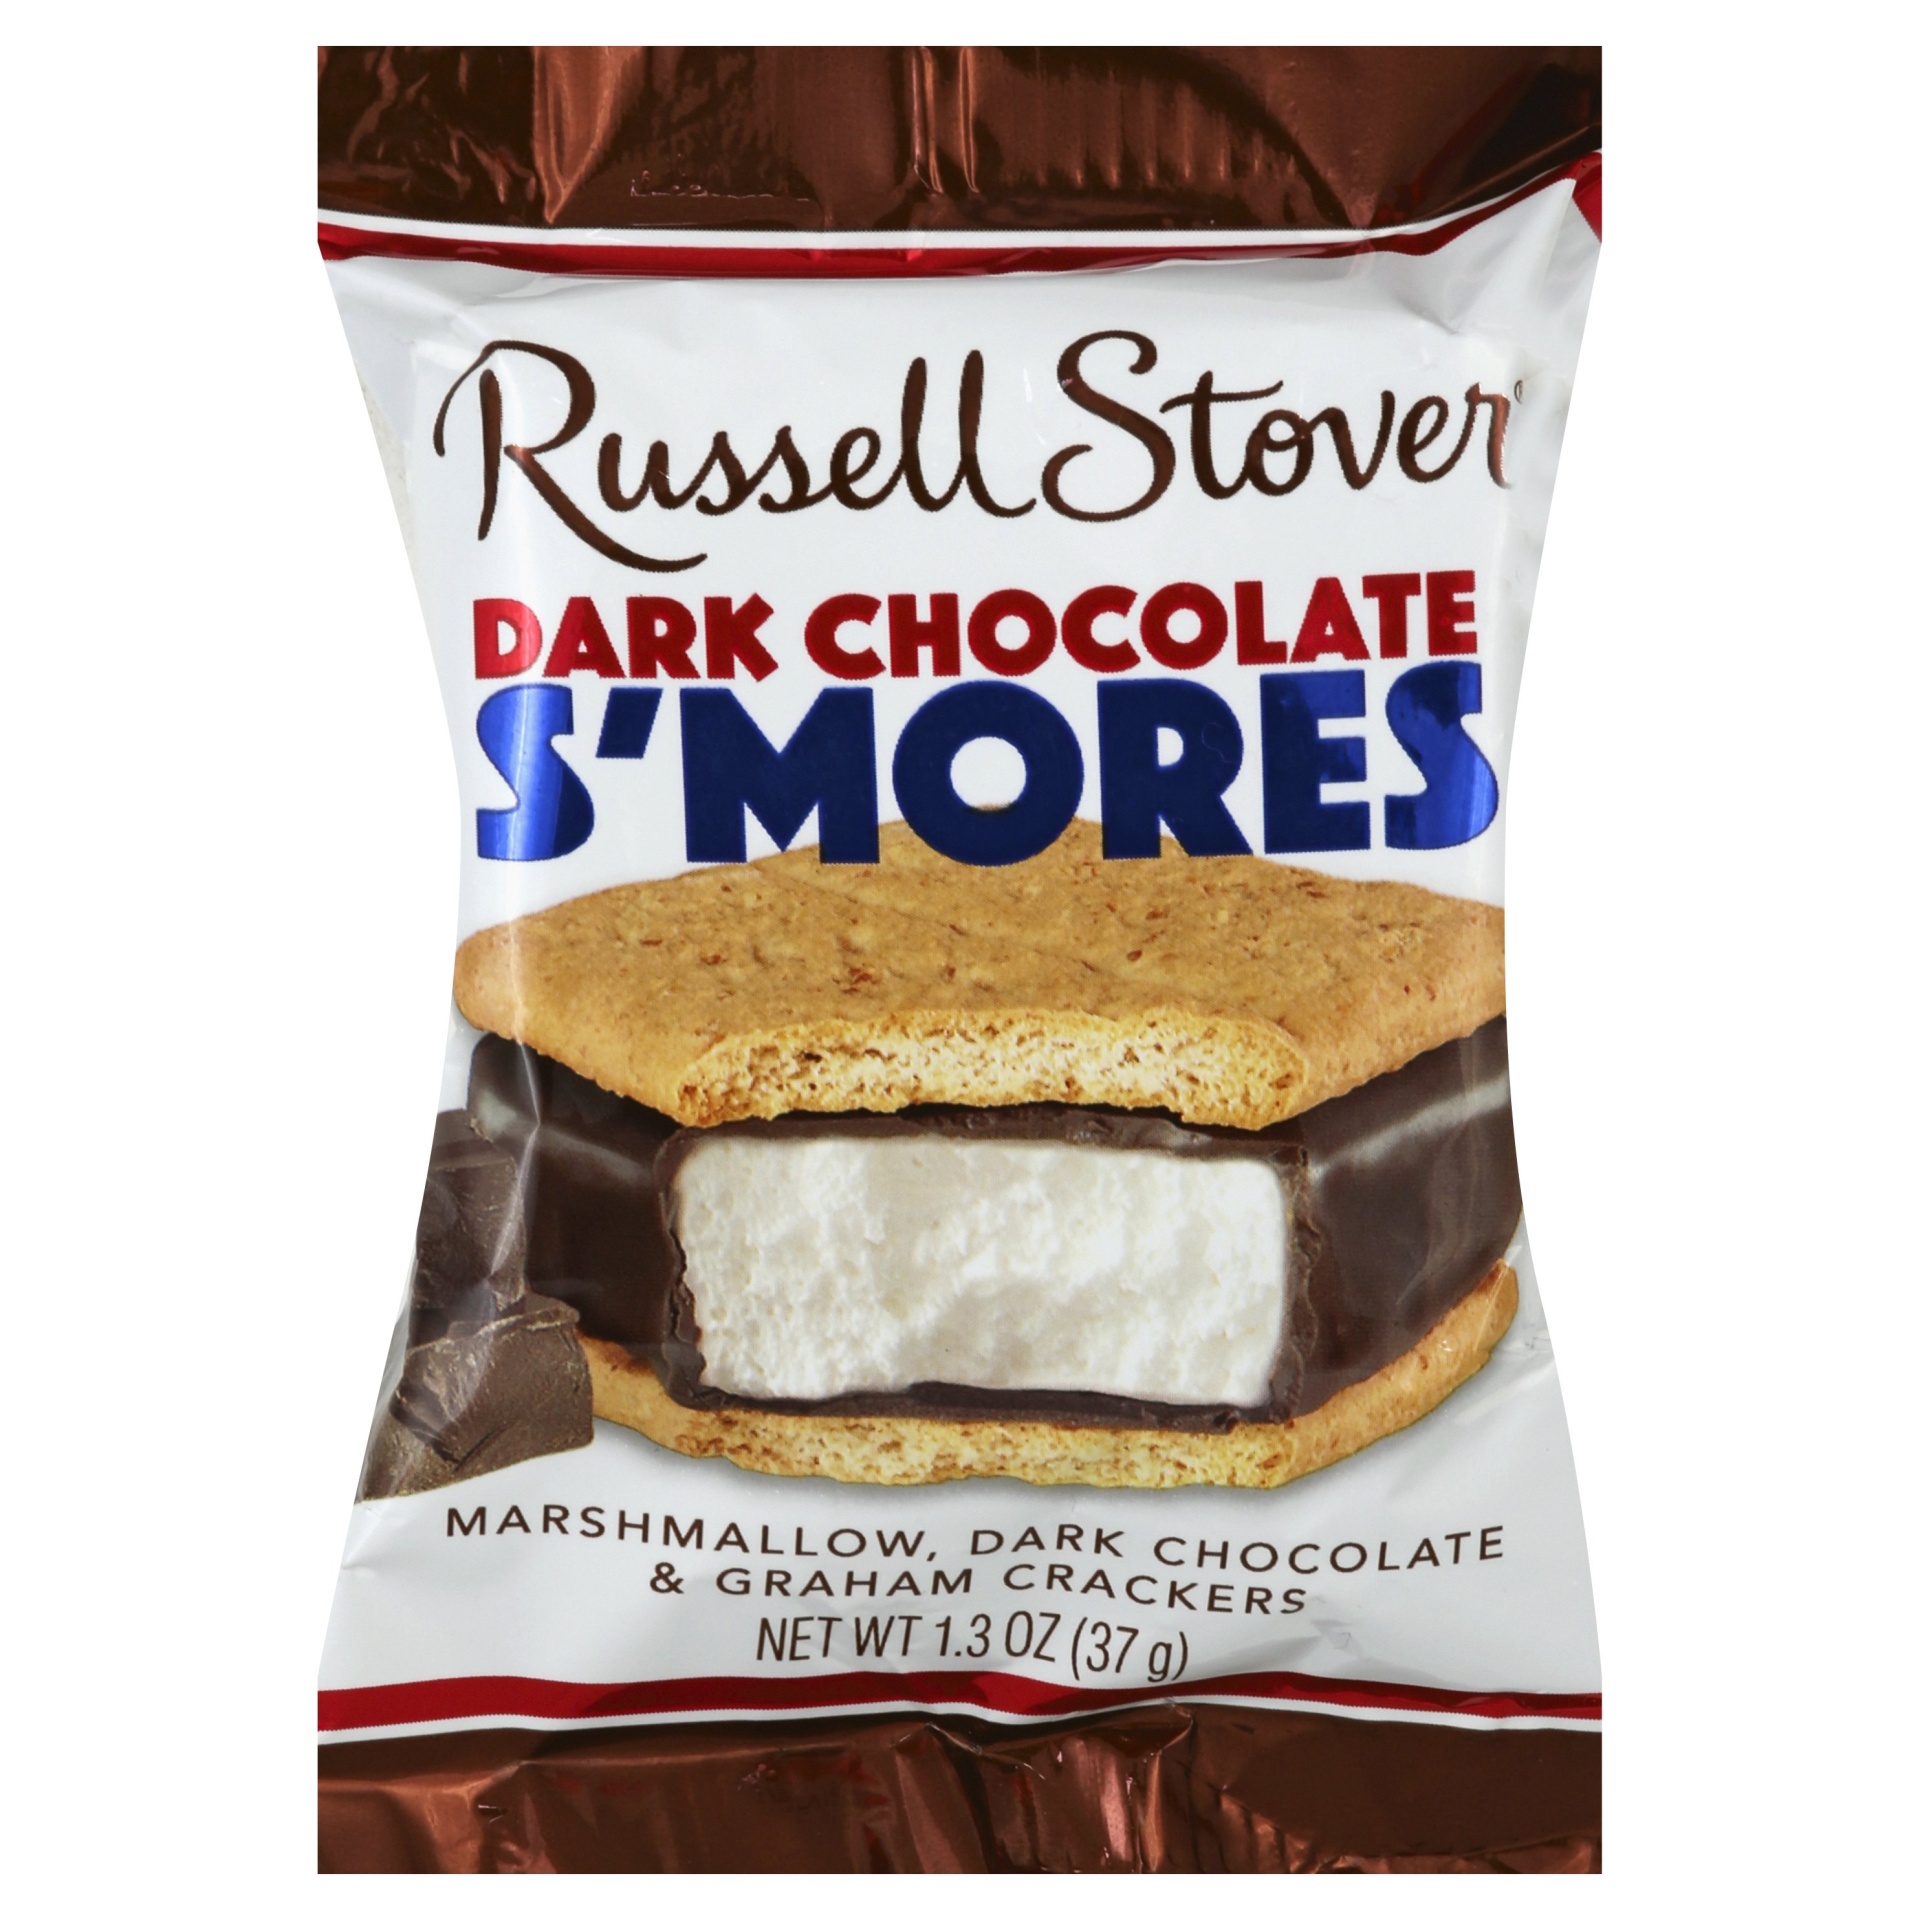 slide 1 of 1, Russell Stover Dark Chocolate Smores, 1.3 oz